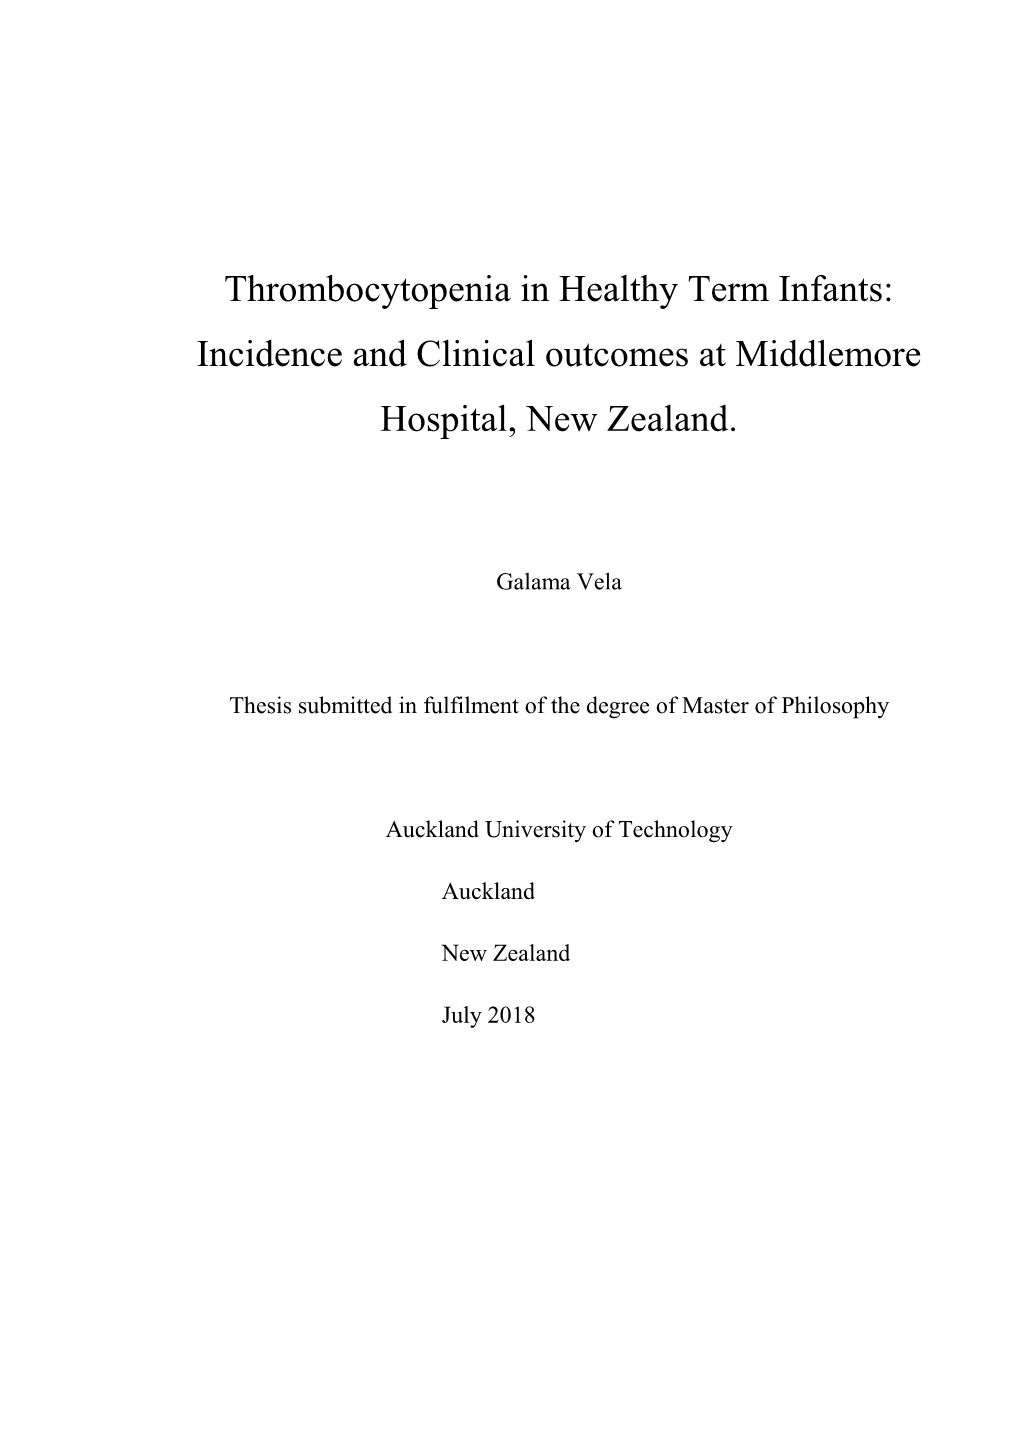 Thrombocytopenia in Healthy Term Infants: Incidence and Clinical Outcomes at Middlemore Hospital, New Zealand